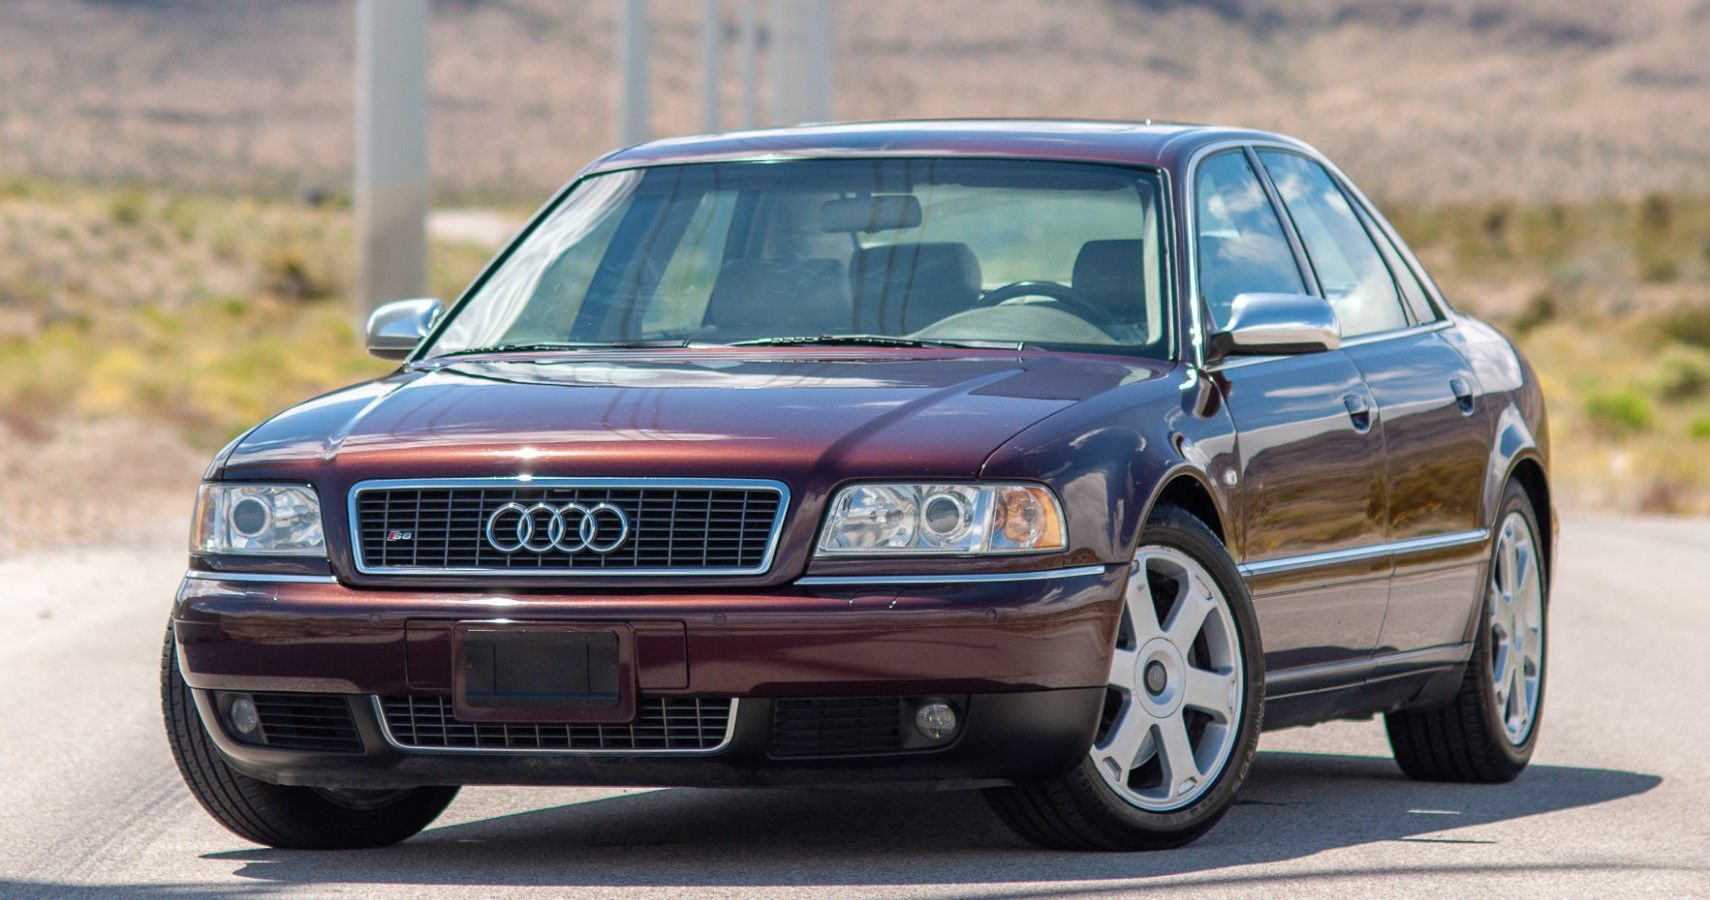 2001 Audi S8 has a timeless appeal